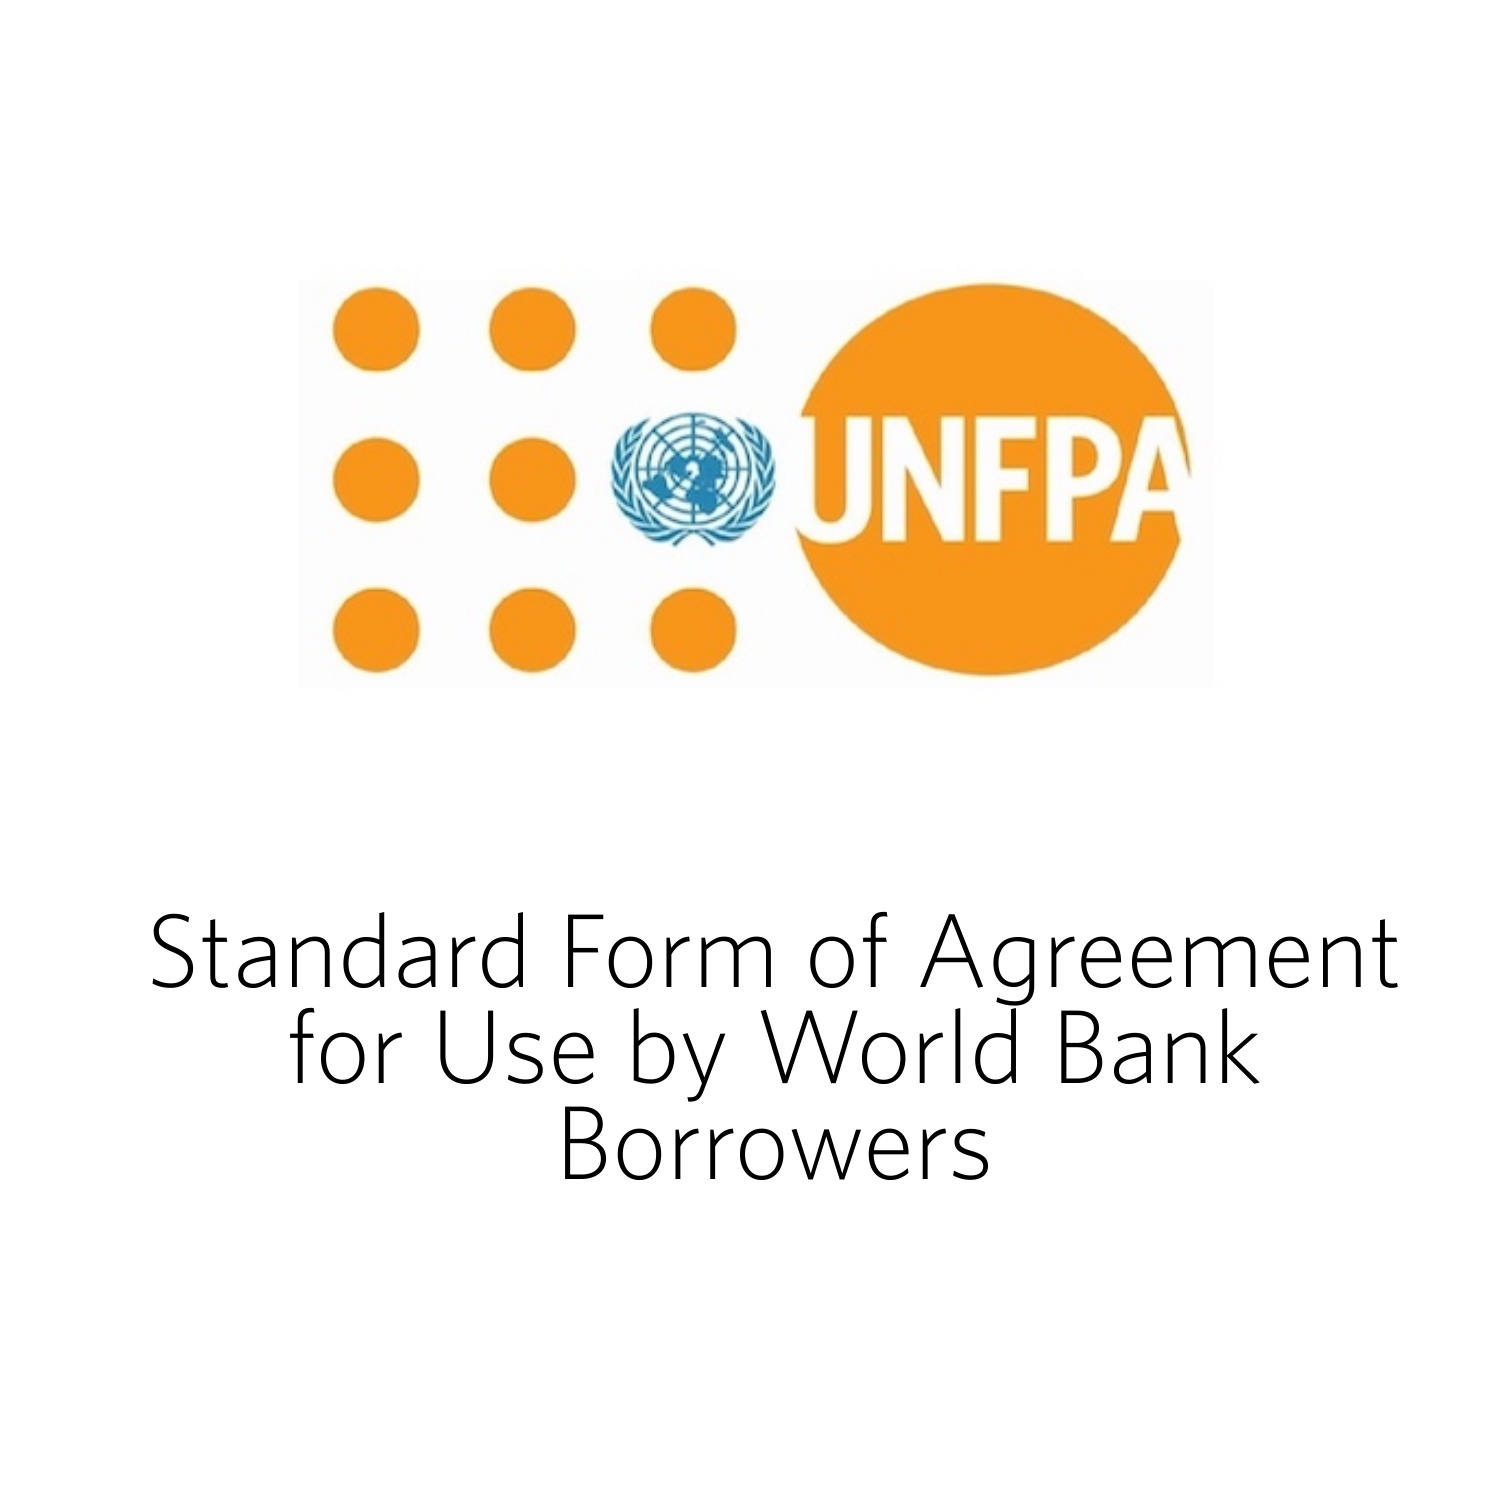 Standard Form of Framework Agreement for Use by World Bank Borrowers